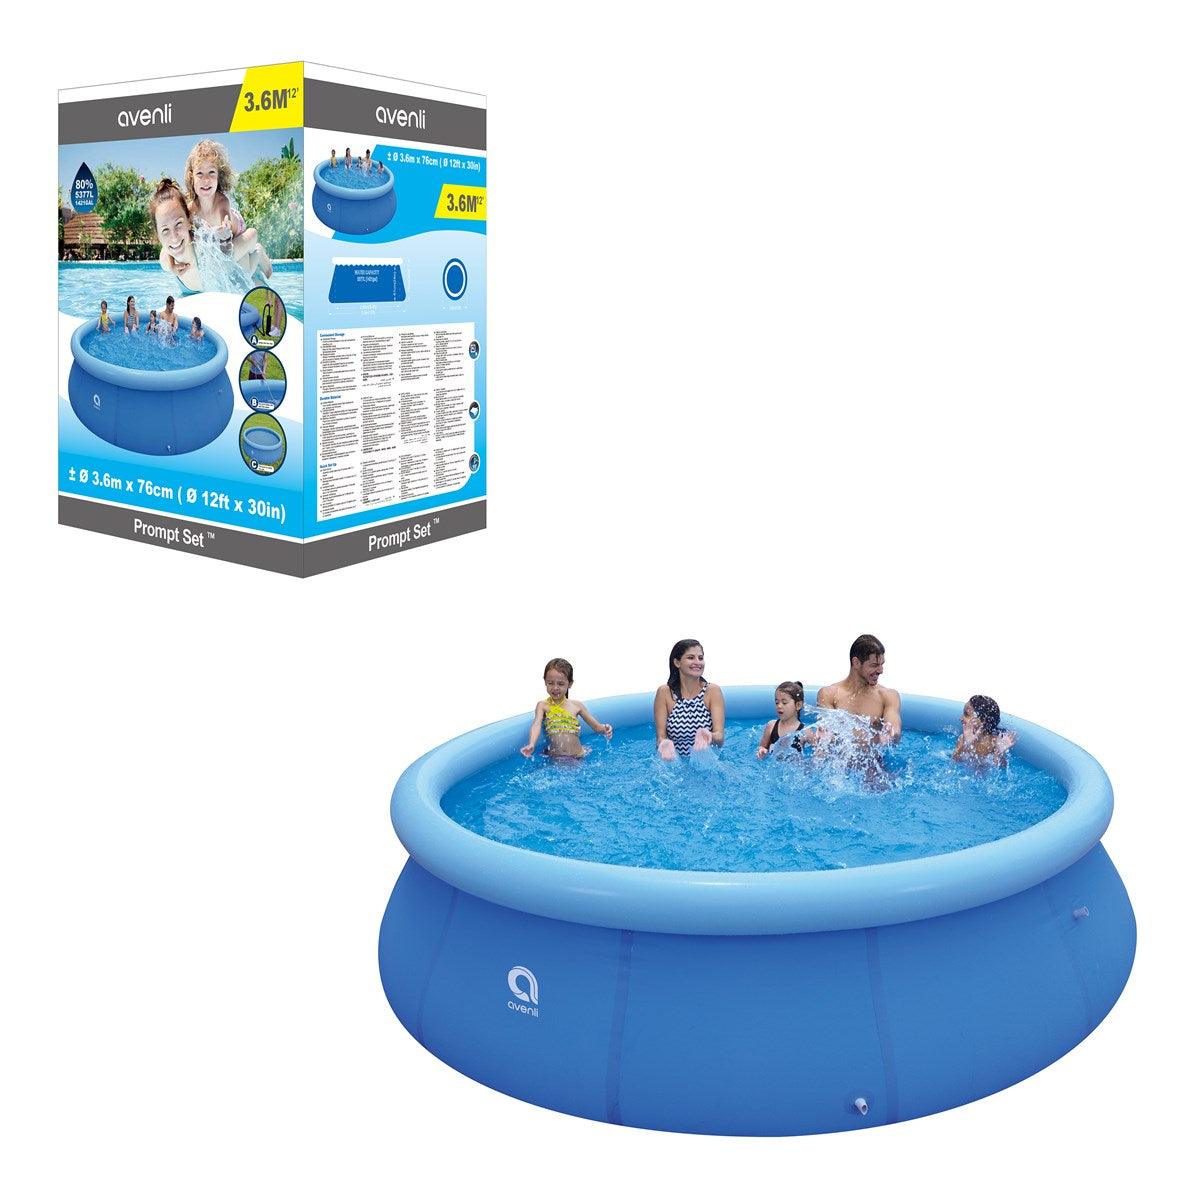 Avenli Prompt Set Swimming Pool | 12ft - Choice Stores